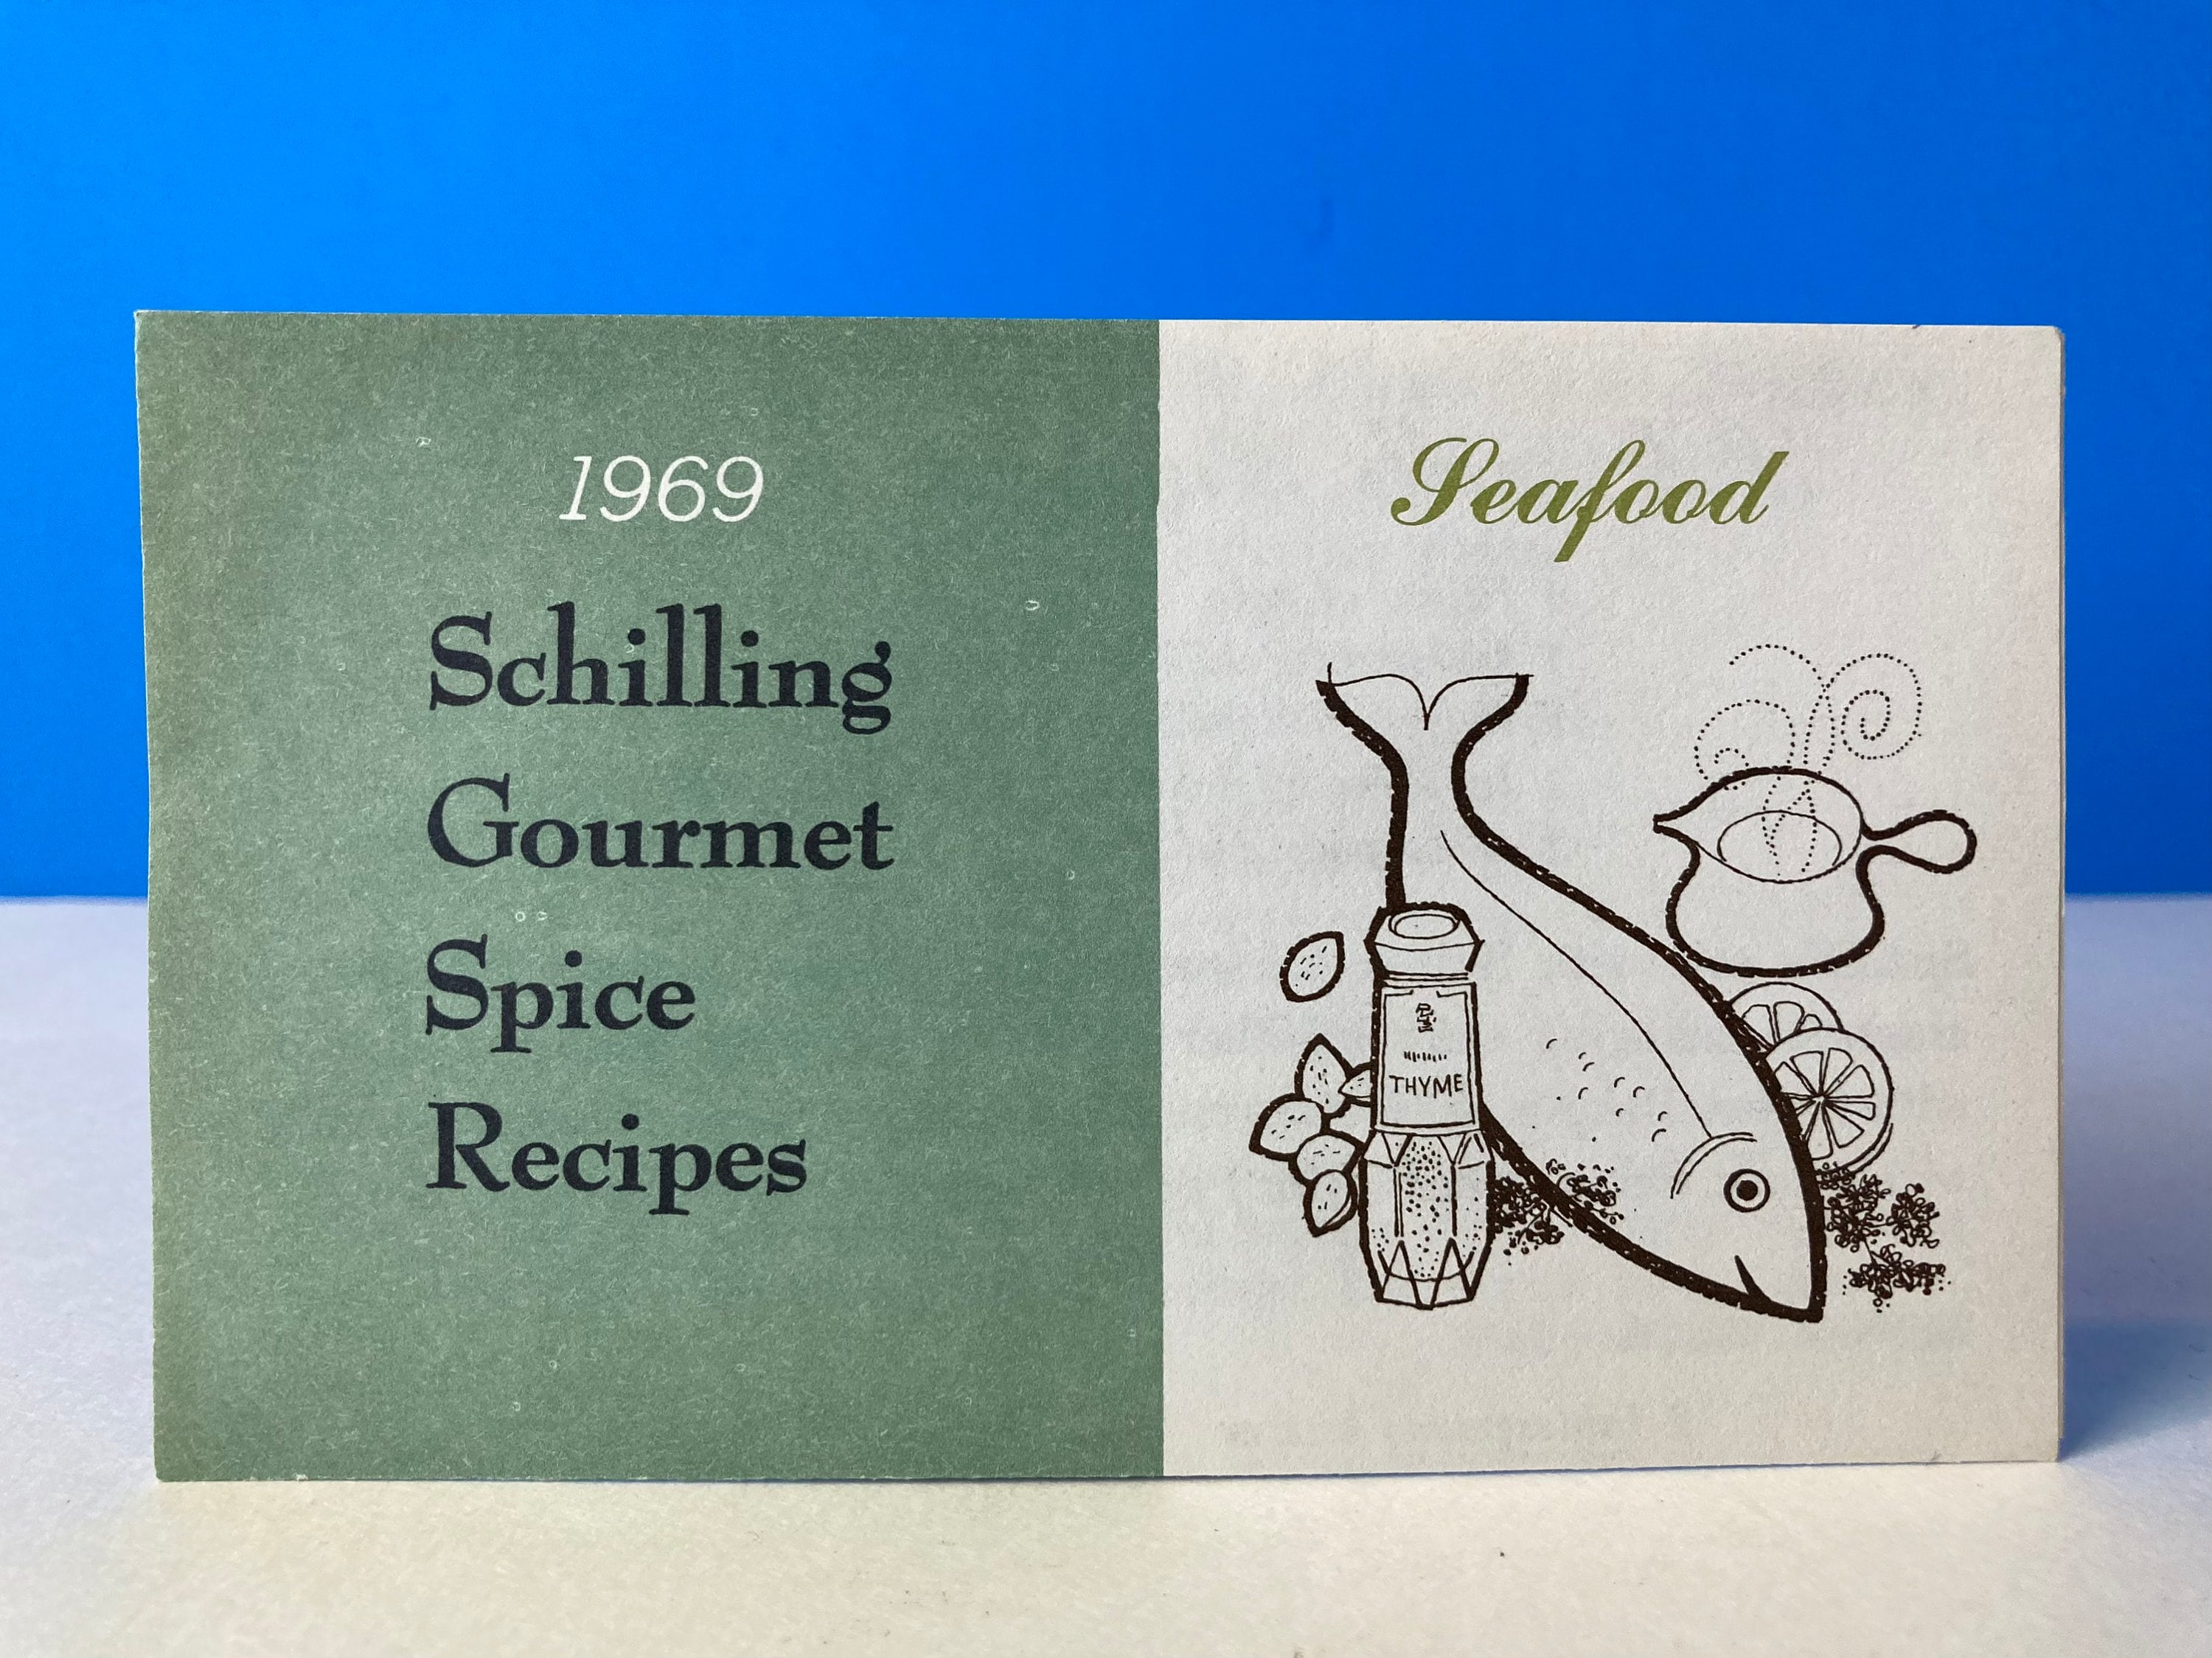 SEAFOOD 1969 SCHILLING GOURMET SPICE RECIPES TRI-FOLD ADVERTISING